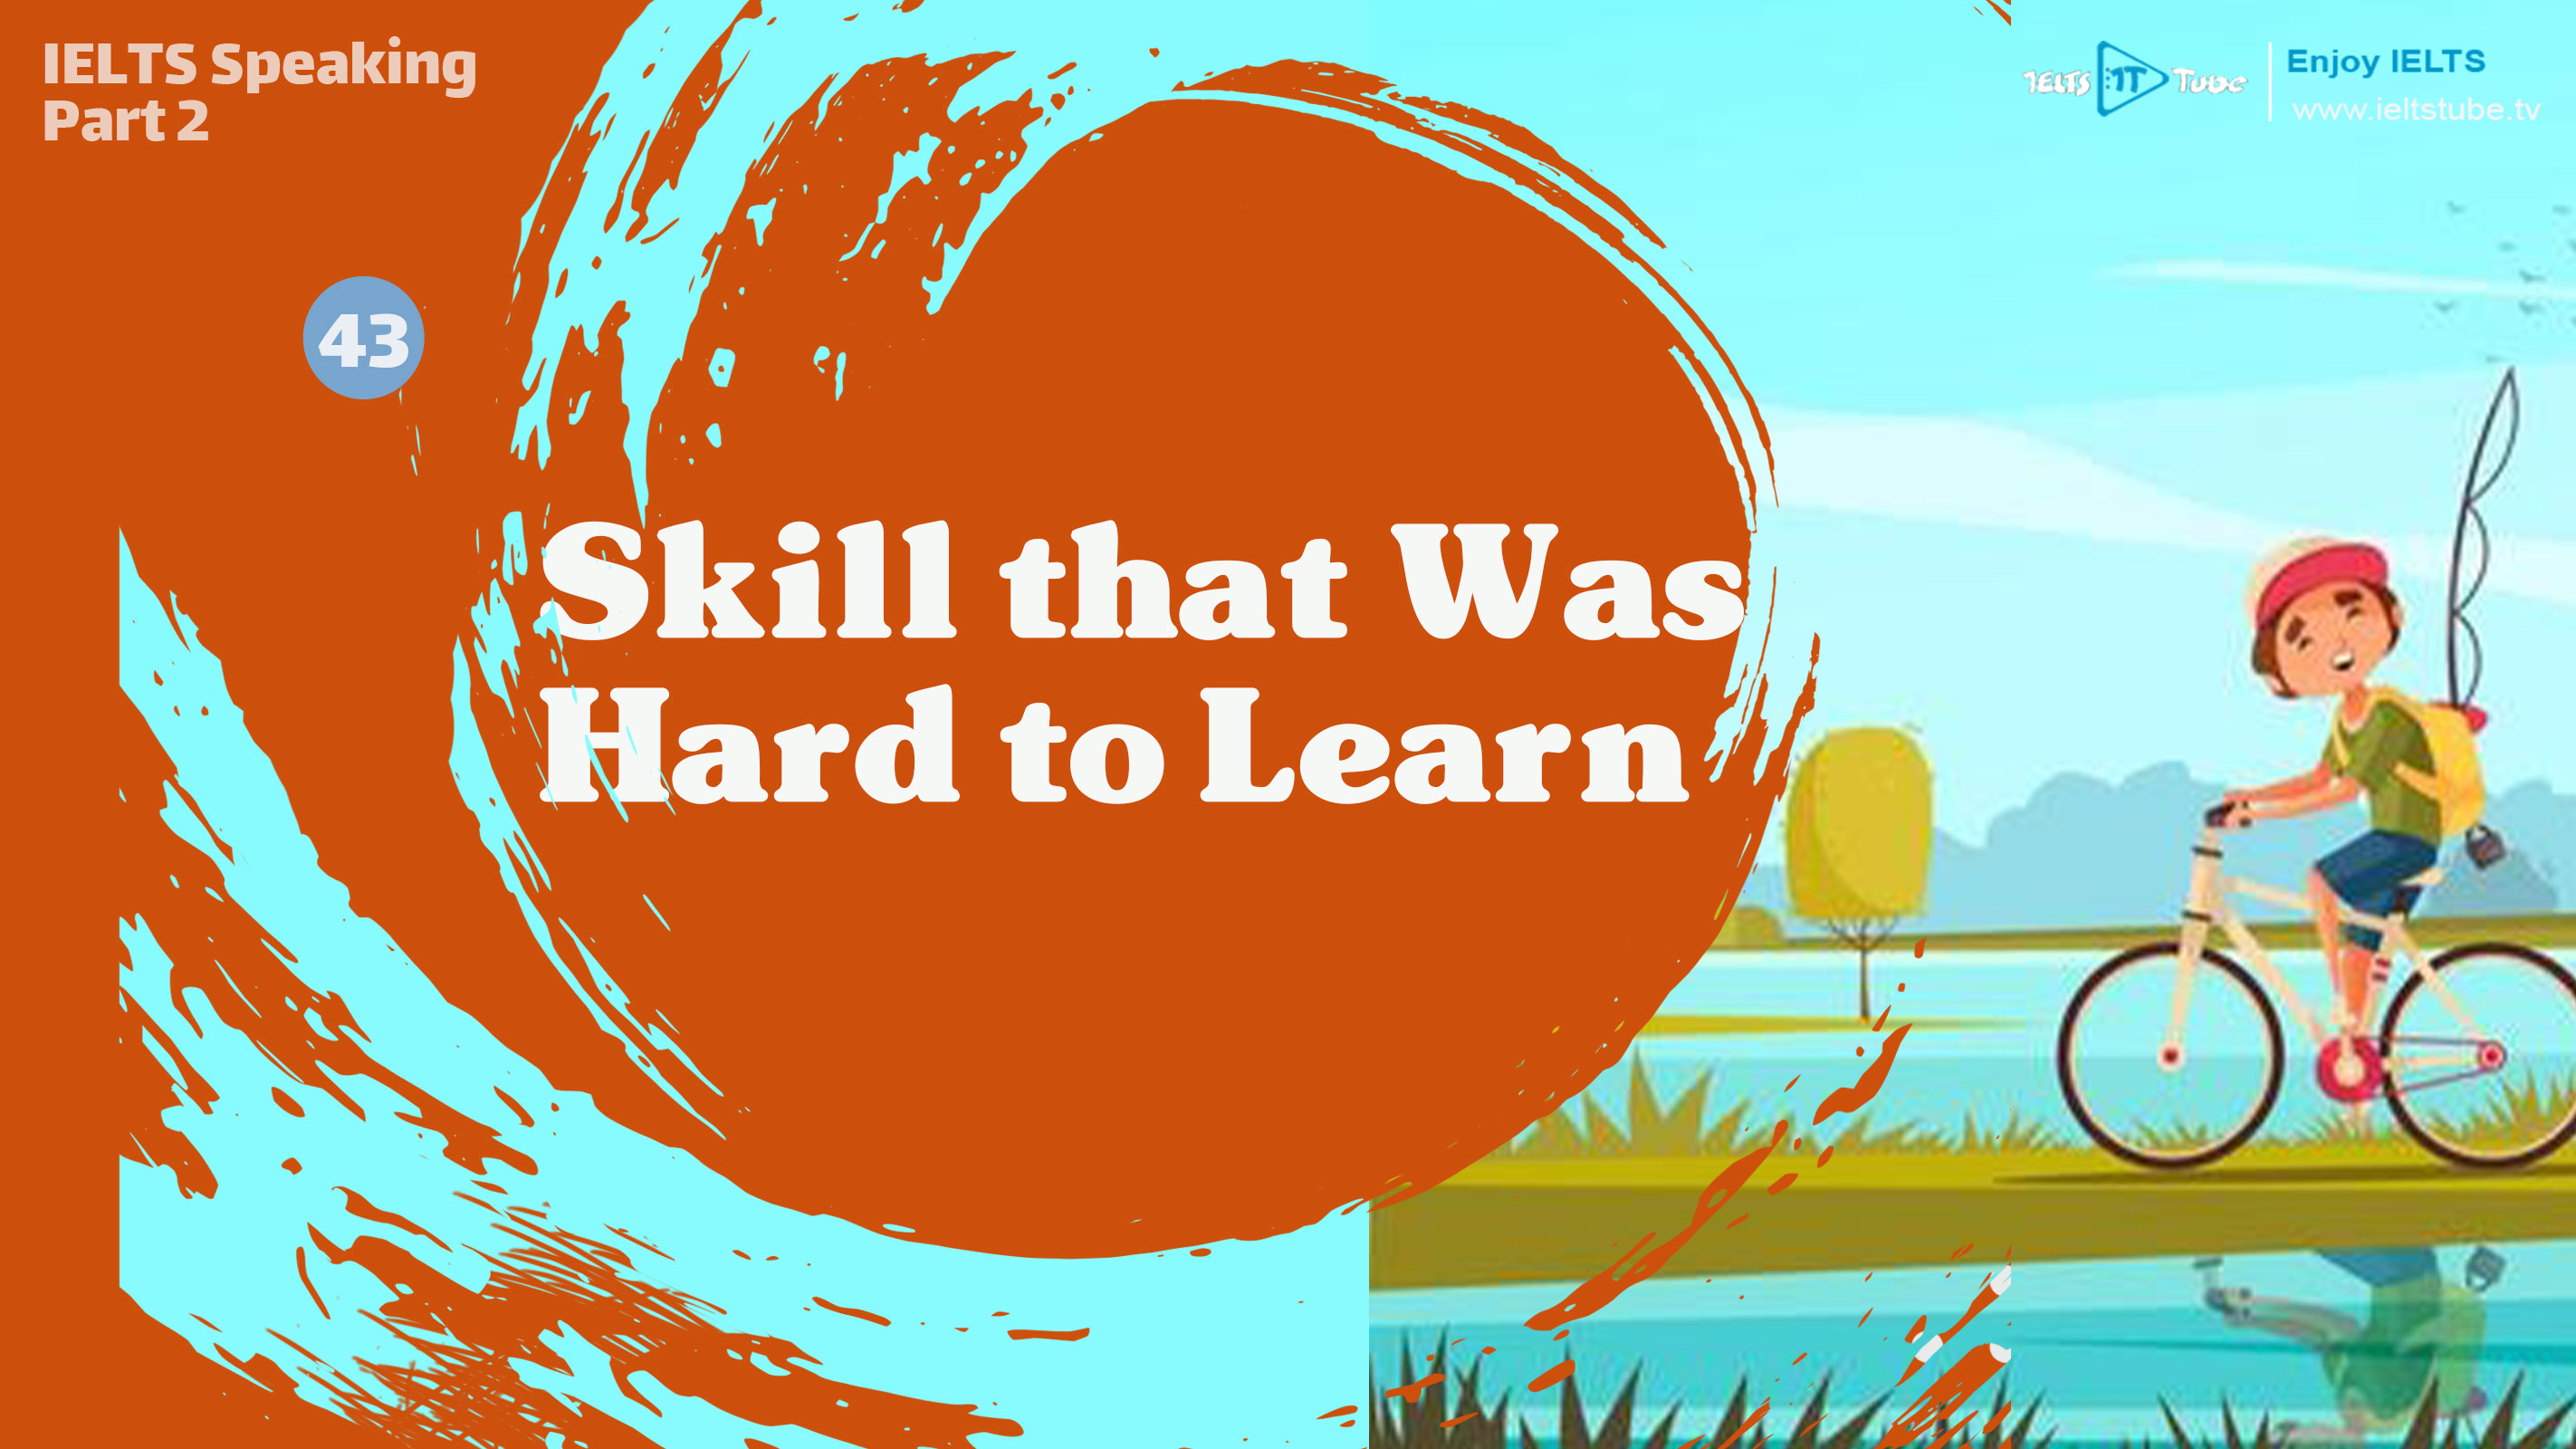 Skill that Was Hard to Learn (Poster)